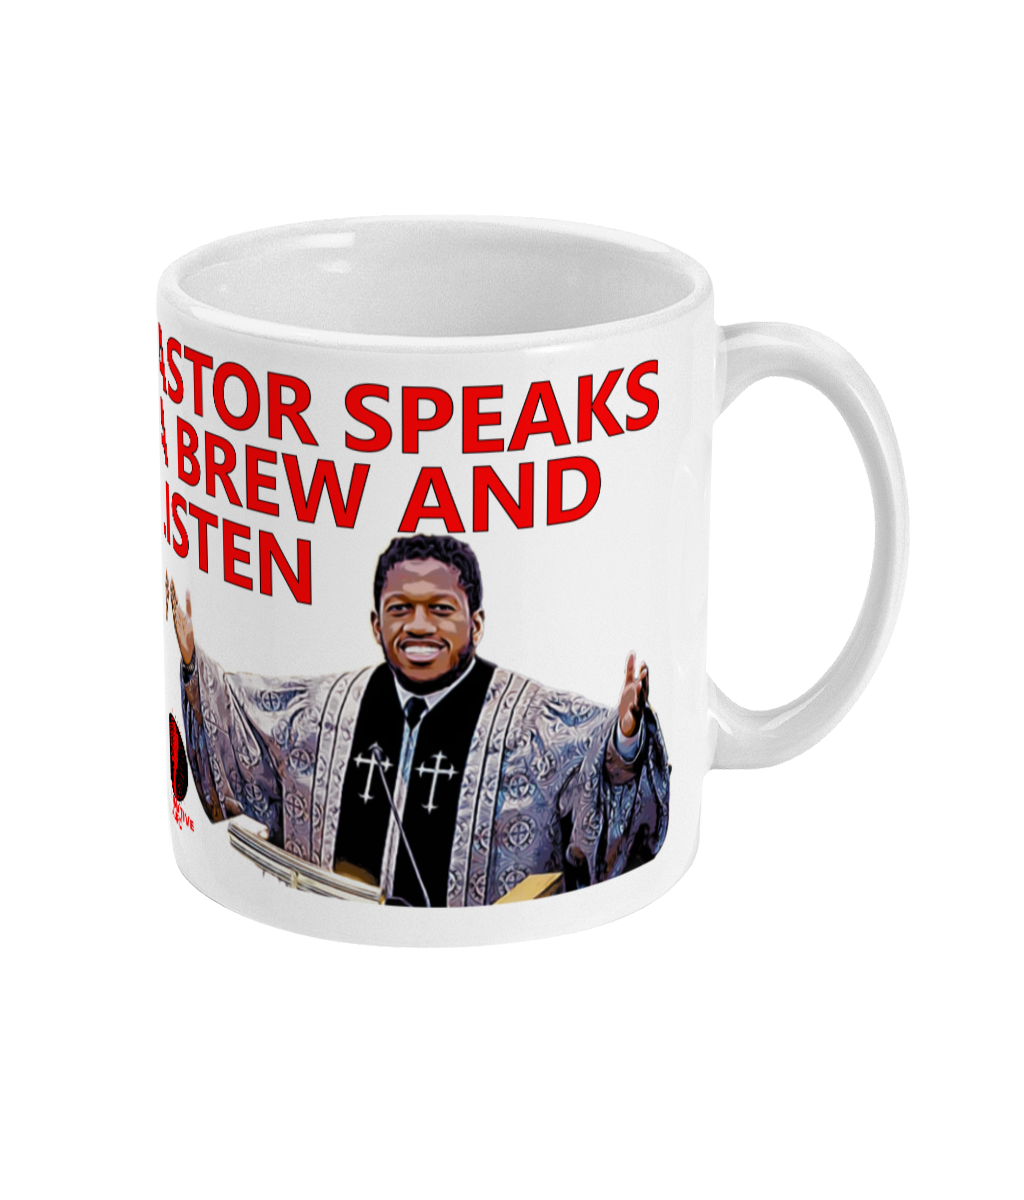 When Pastor Fred speaks we drink a brew and we listen - Mug